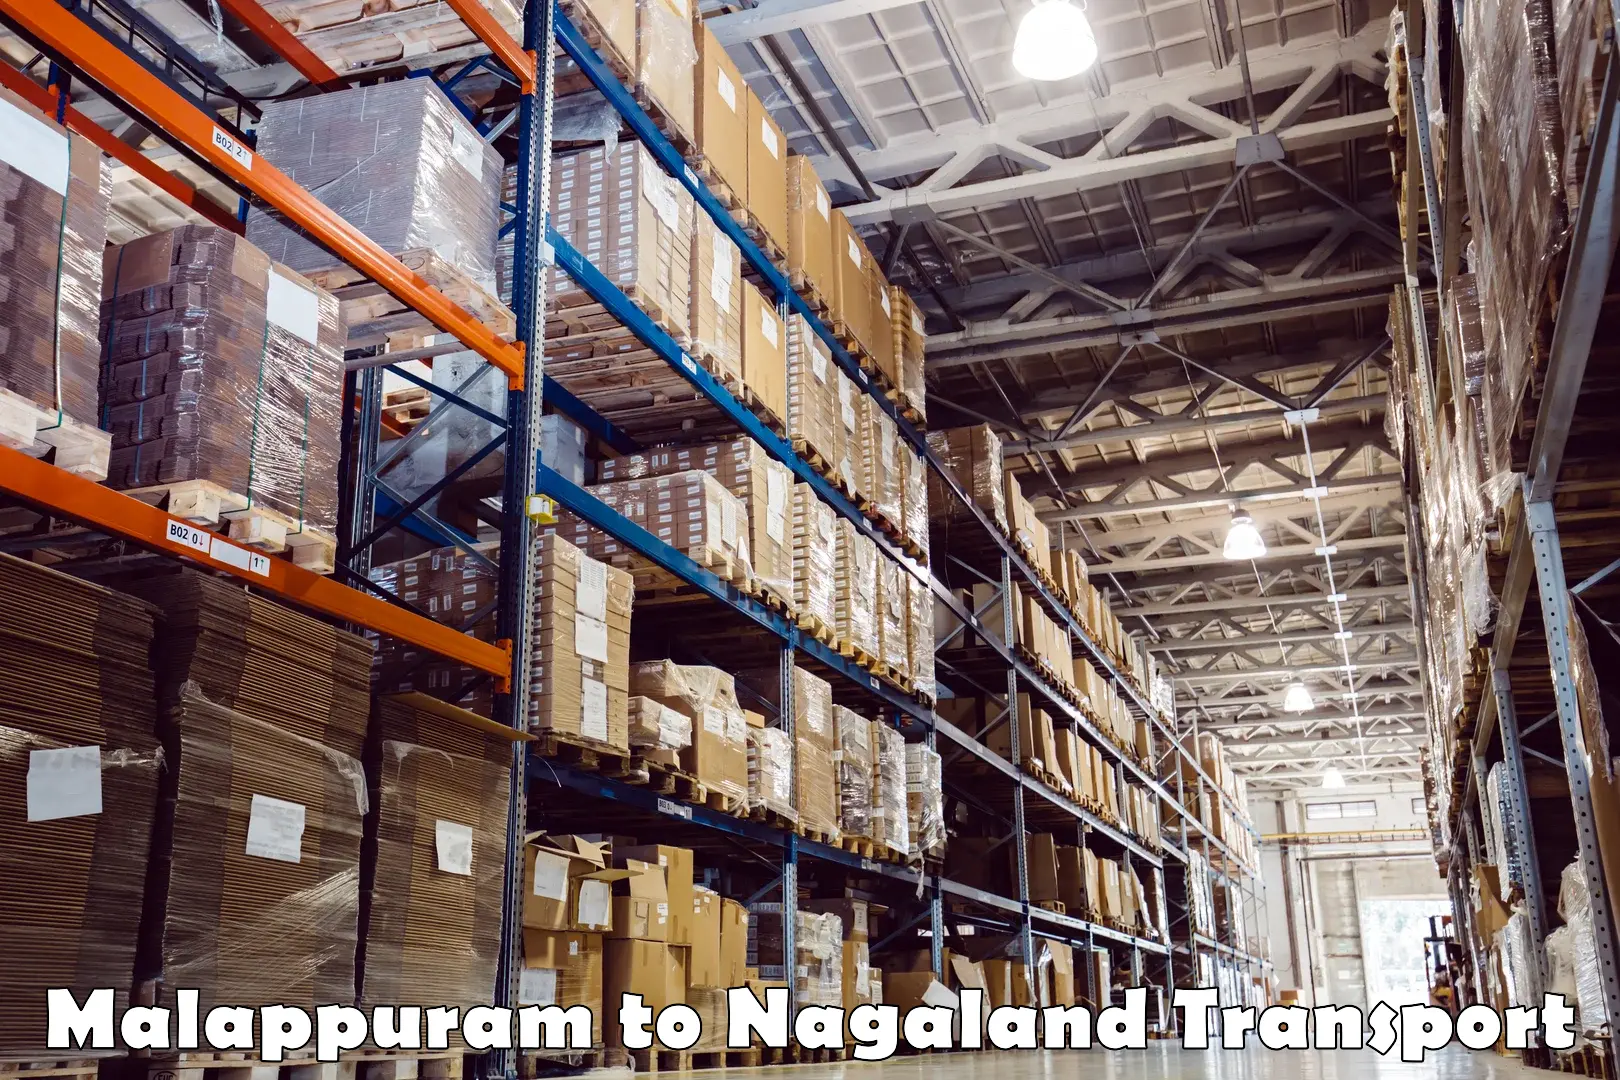 Express transport services in Malappuram to Nagaland